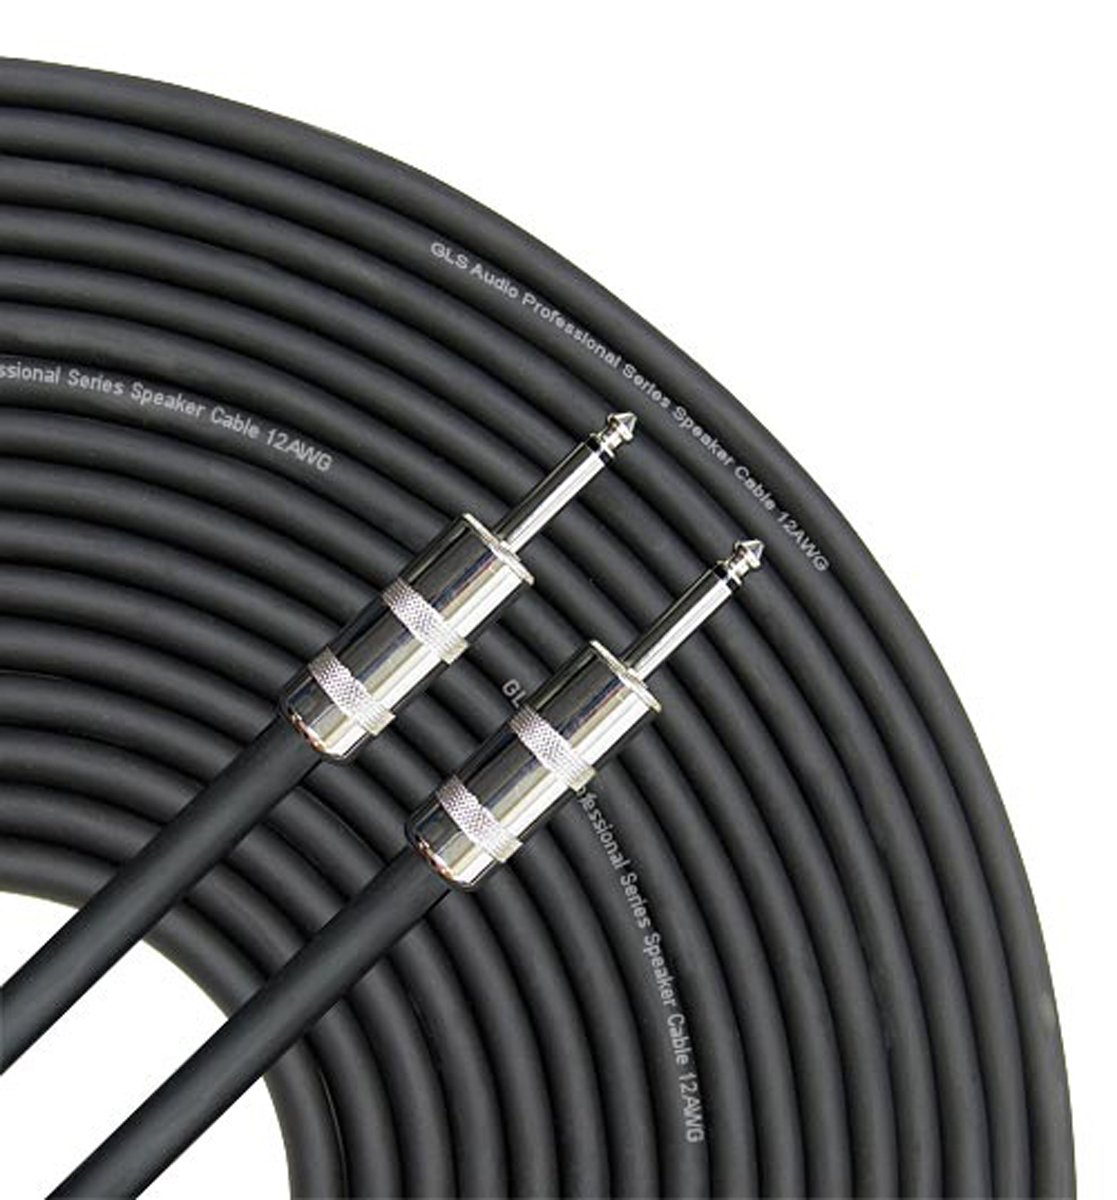 GLS Audio Speaker Cable 1/4" to 1/4" - 12 AWG Professional Bass/Guitar Speaker Cable for Amp - Black, 100 Ft. - image 1 of 4